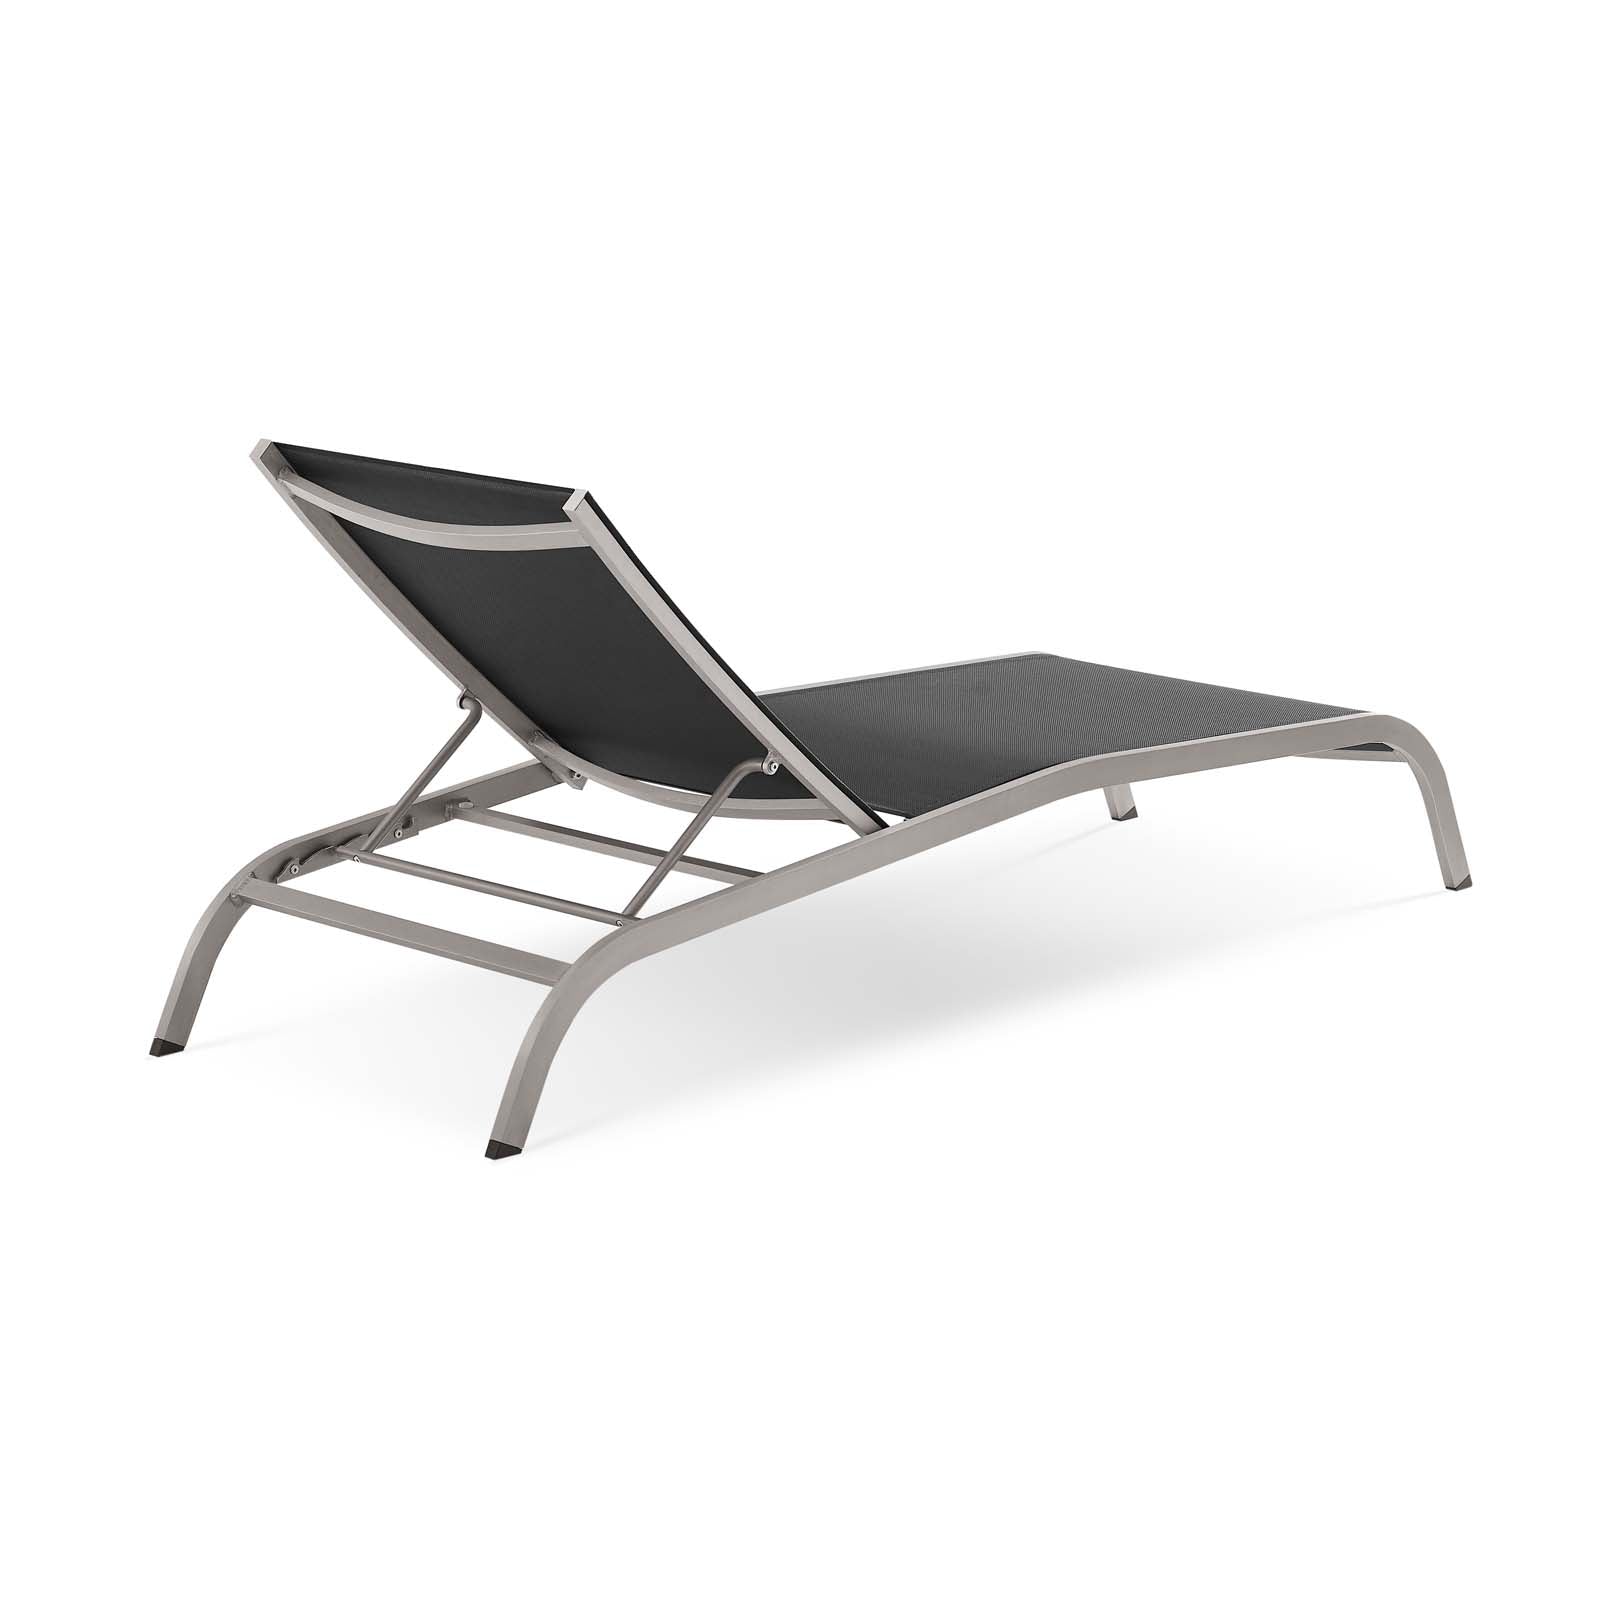 Modway Outdoor Loungers - Savannah Mesh Chaise Outdoor Patio Aluminum Lounge Chair Black